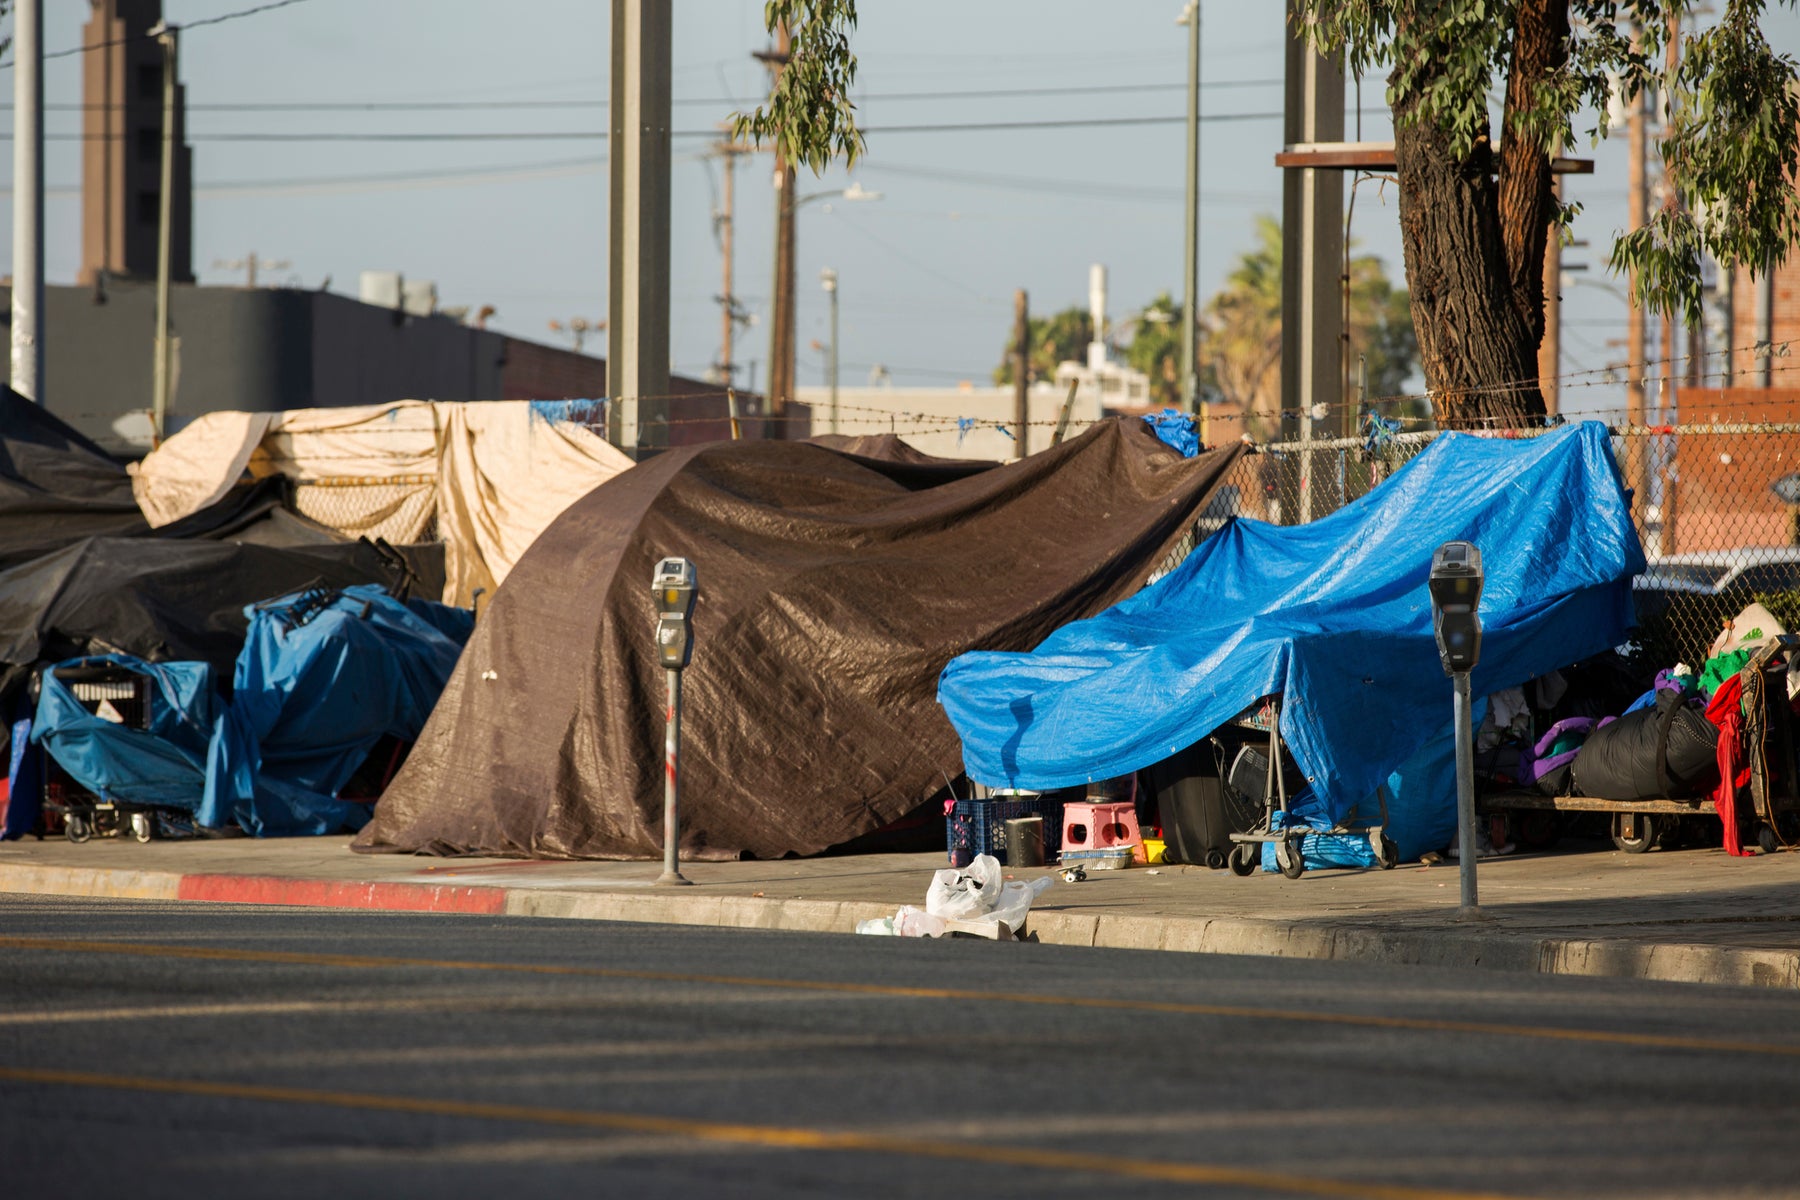 View of the homeless encampments along Central Avenue in Downtown Los Angeles, California